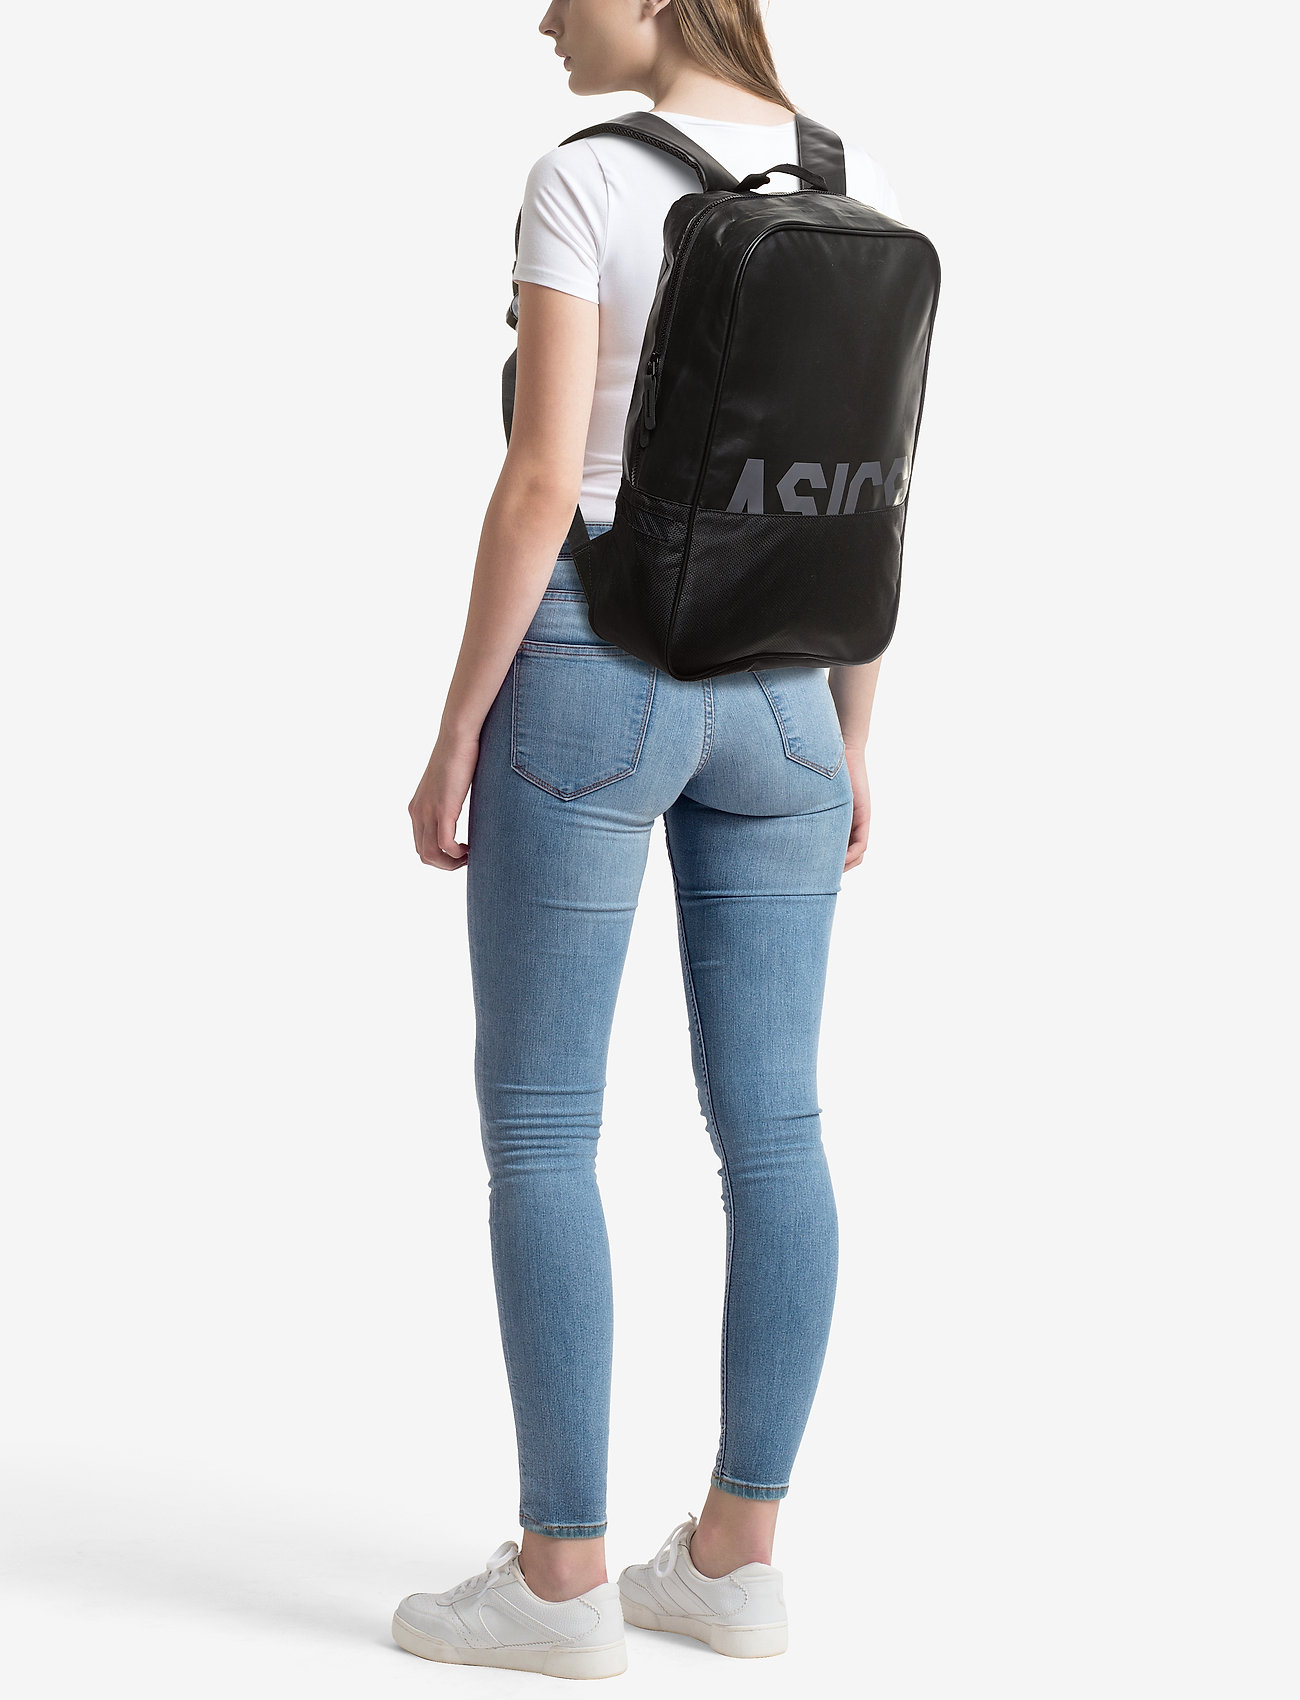 asics tr core backpack cheap online